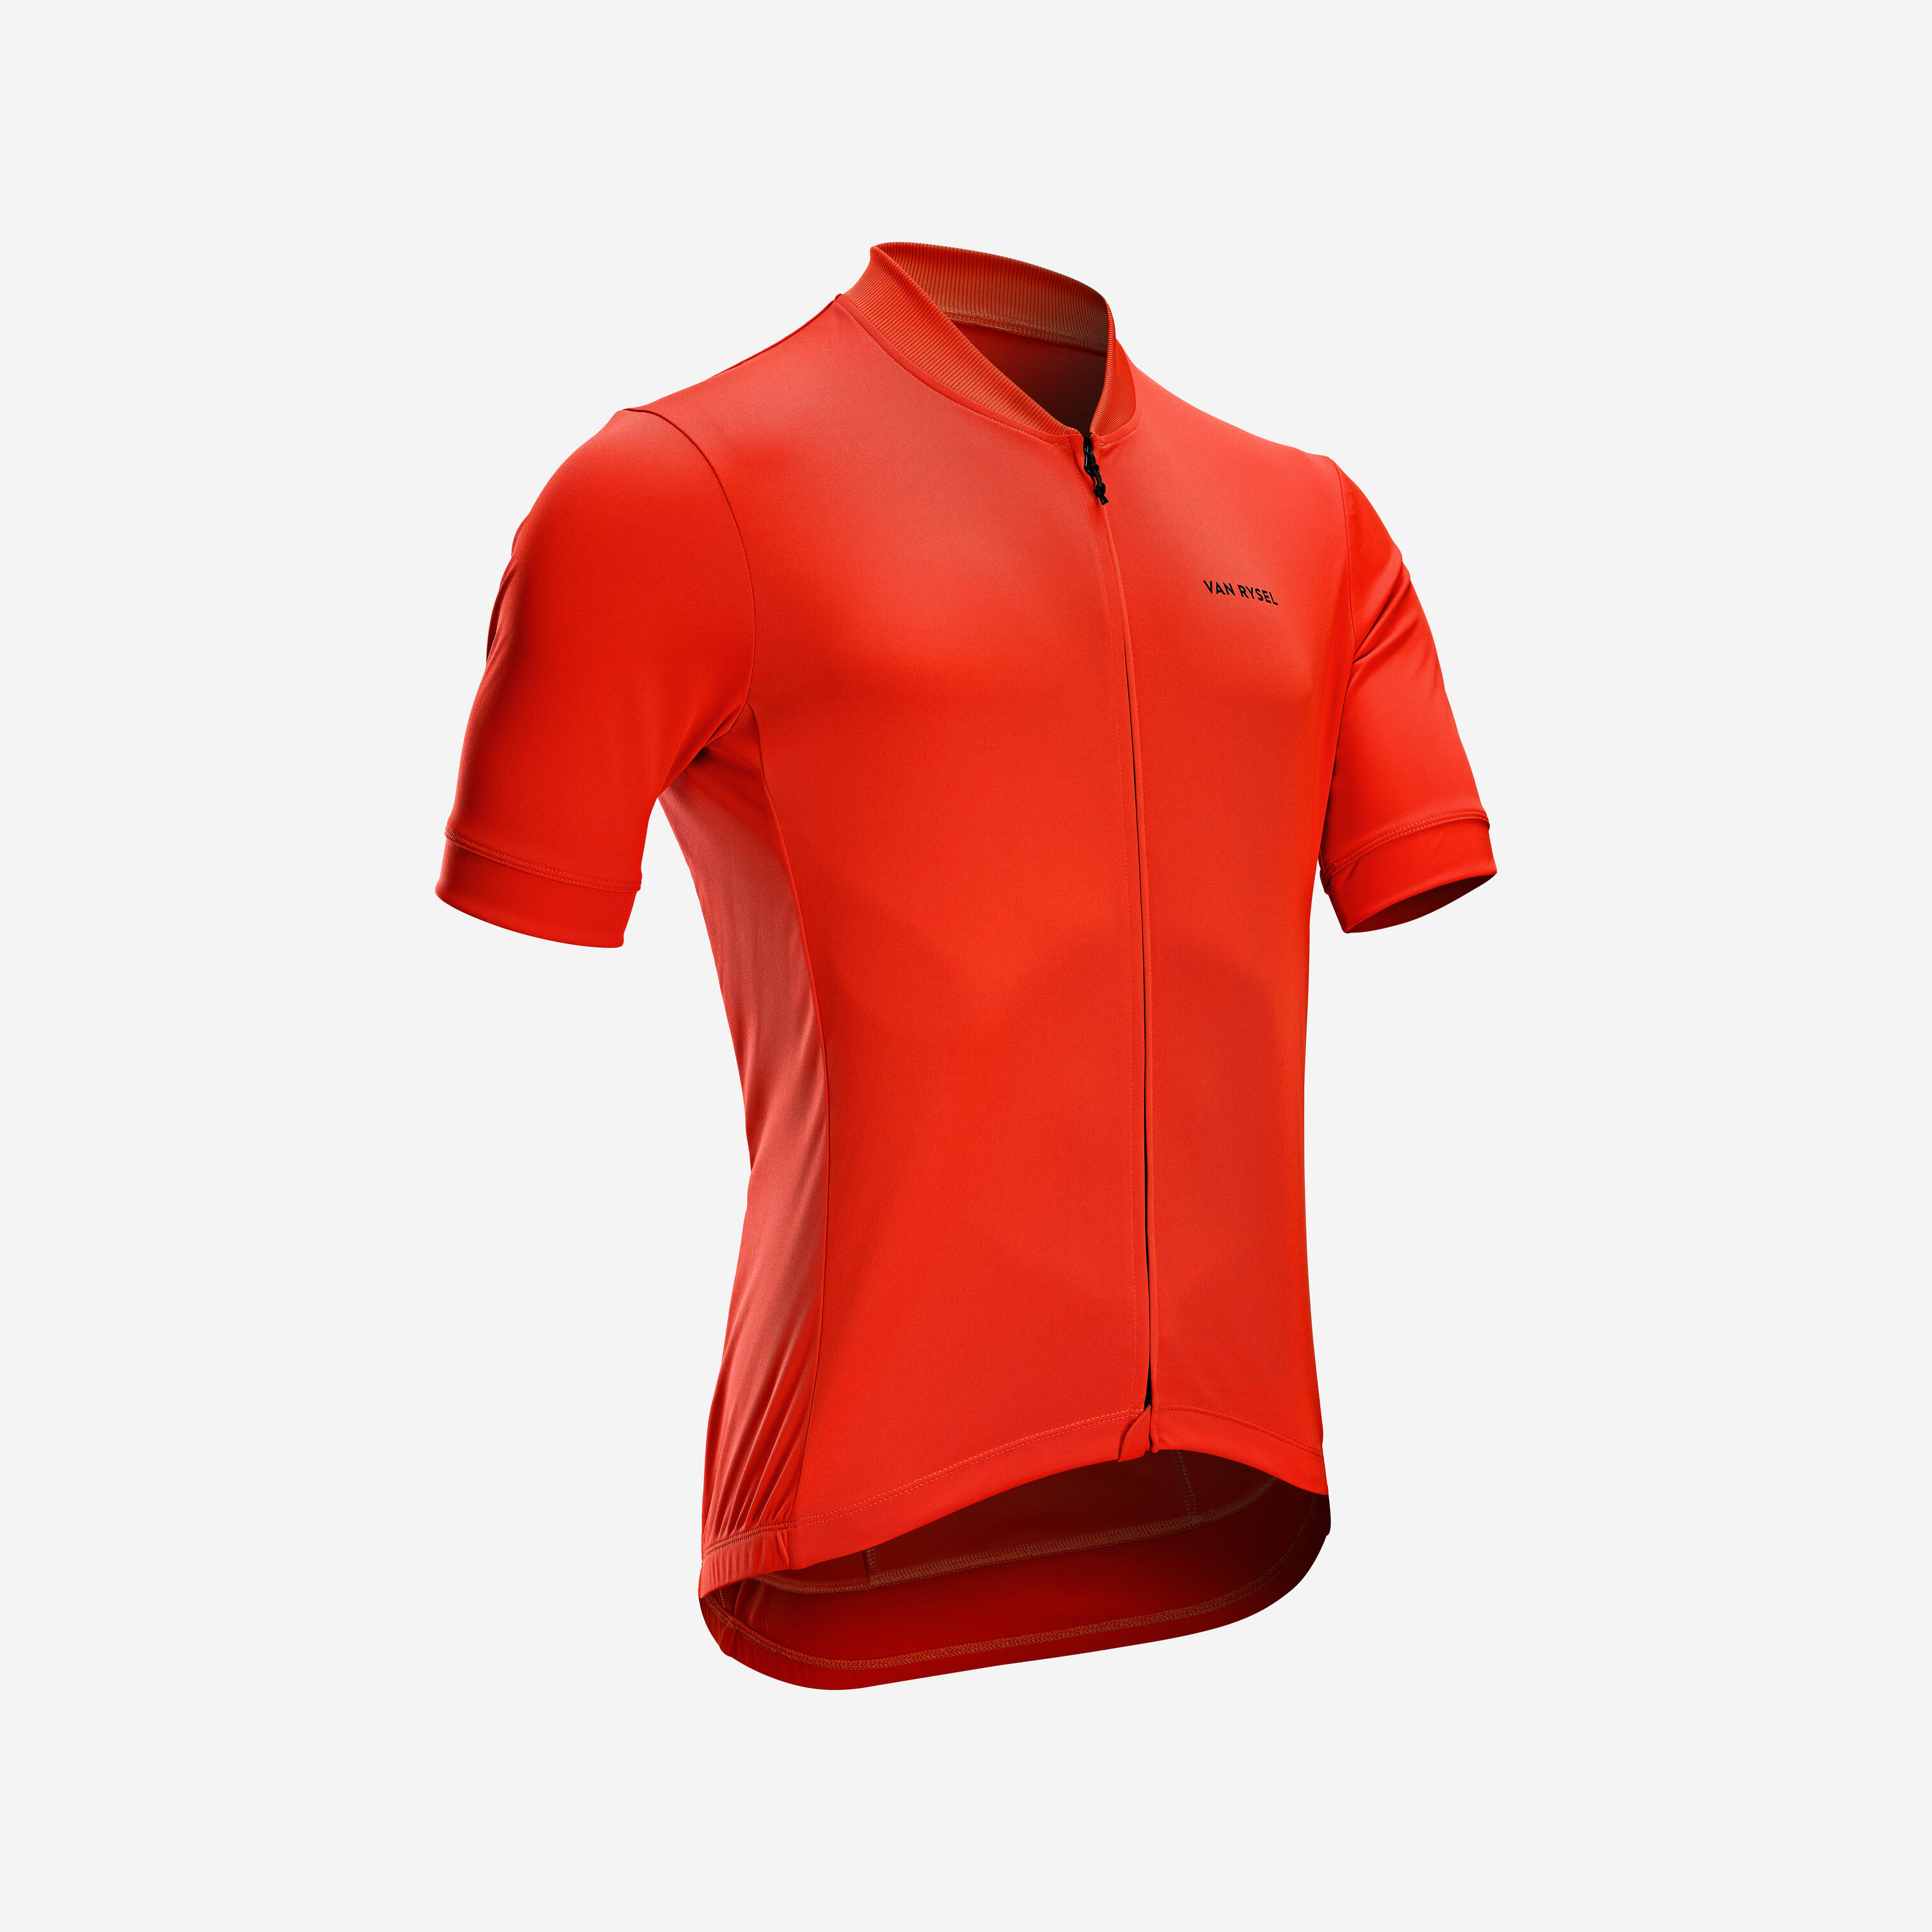 Men's Short-Sleeved Road Cycling Summer Jersey RC100 - Red 2/7